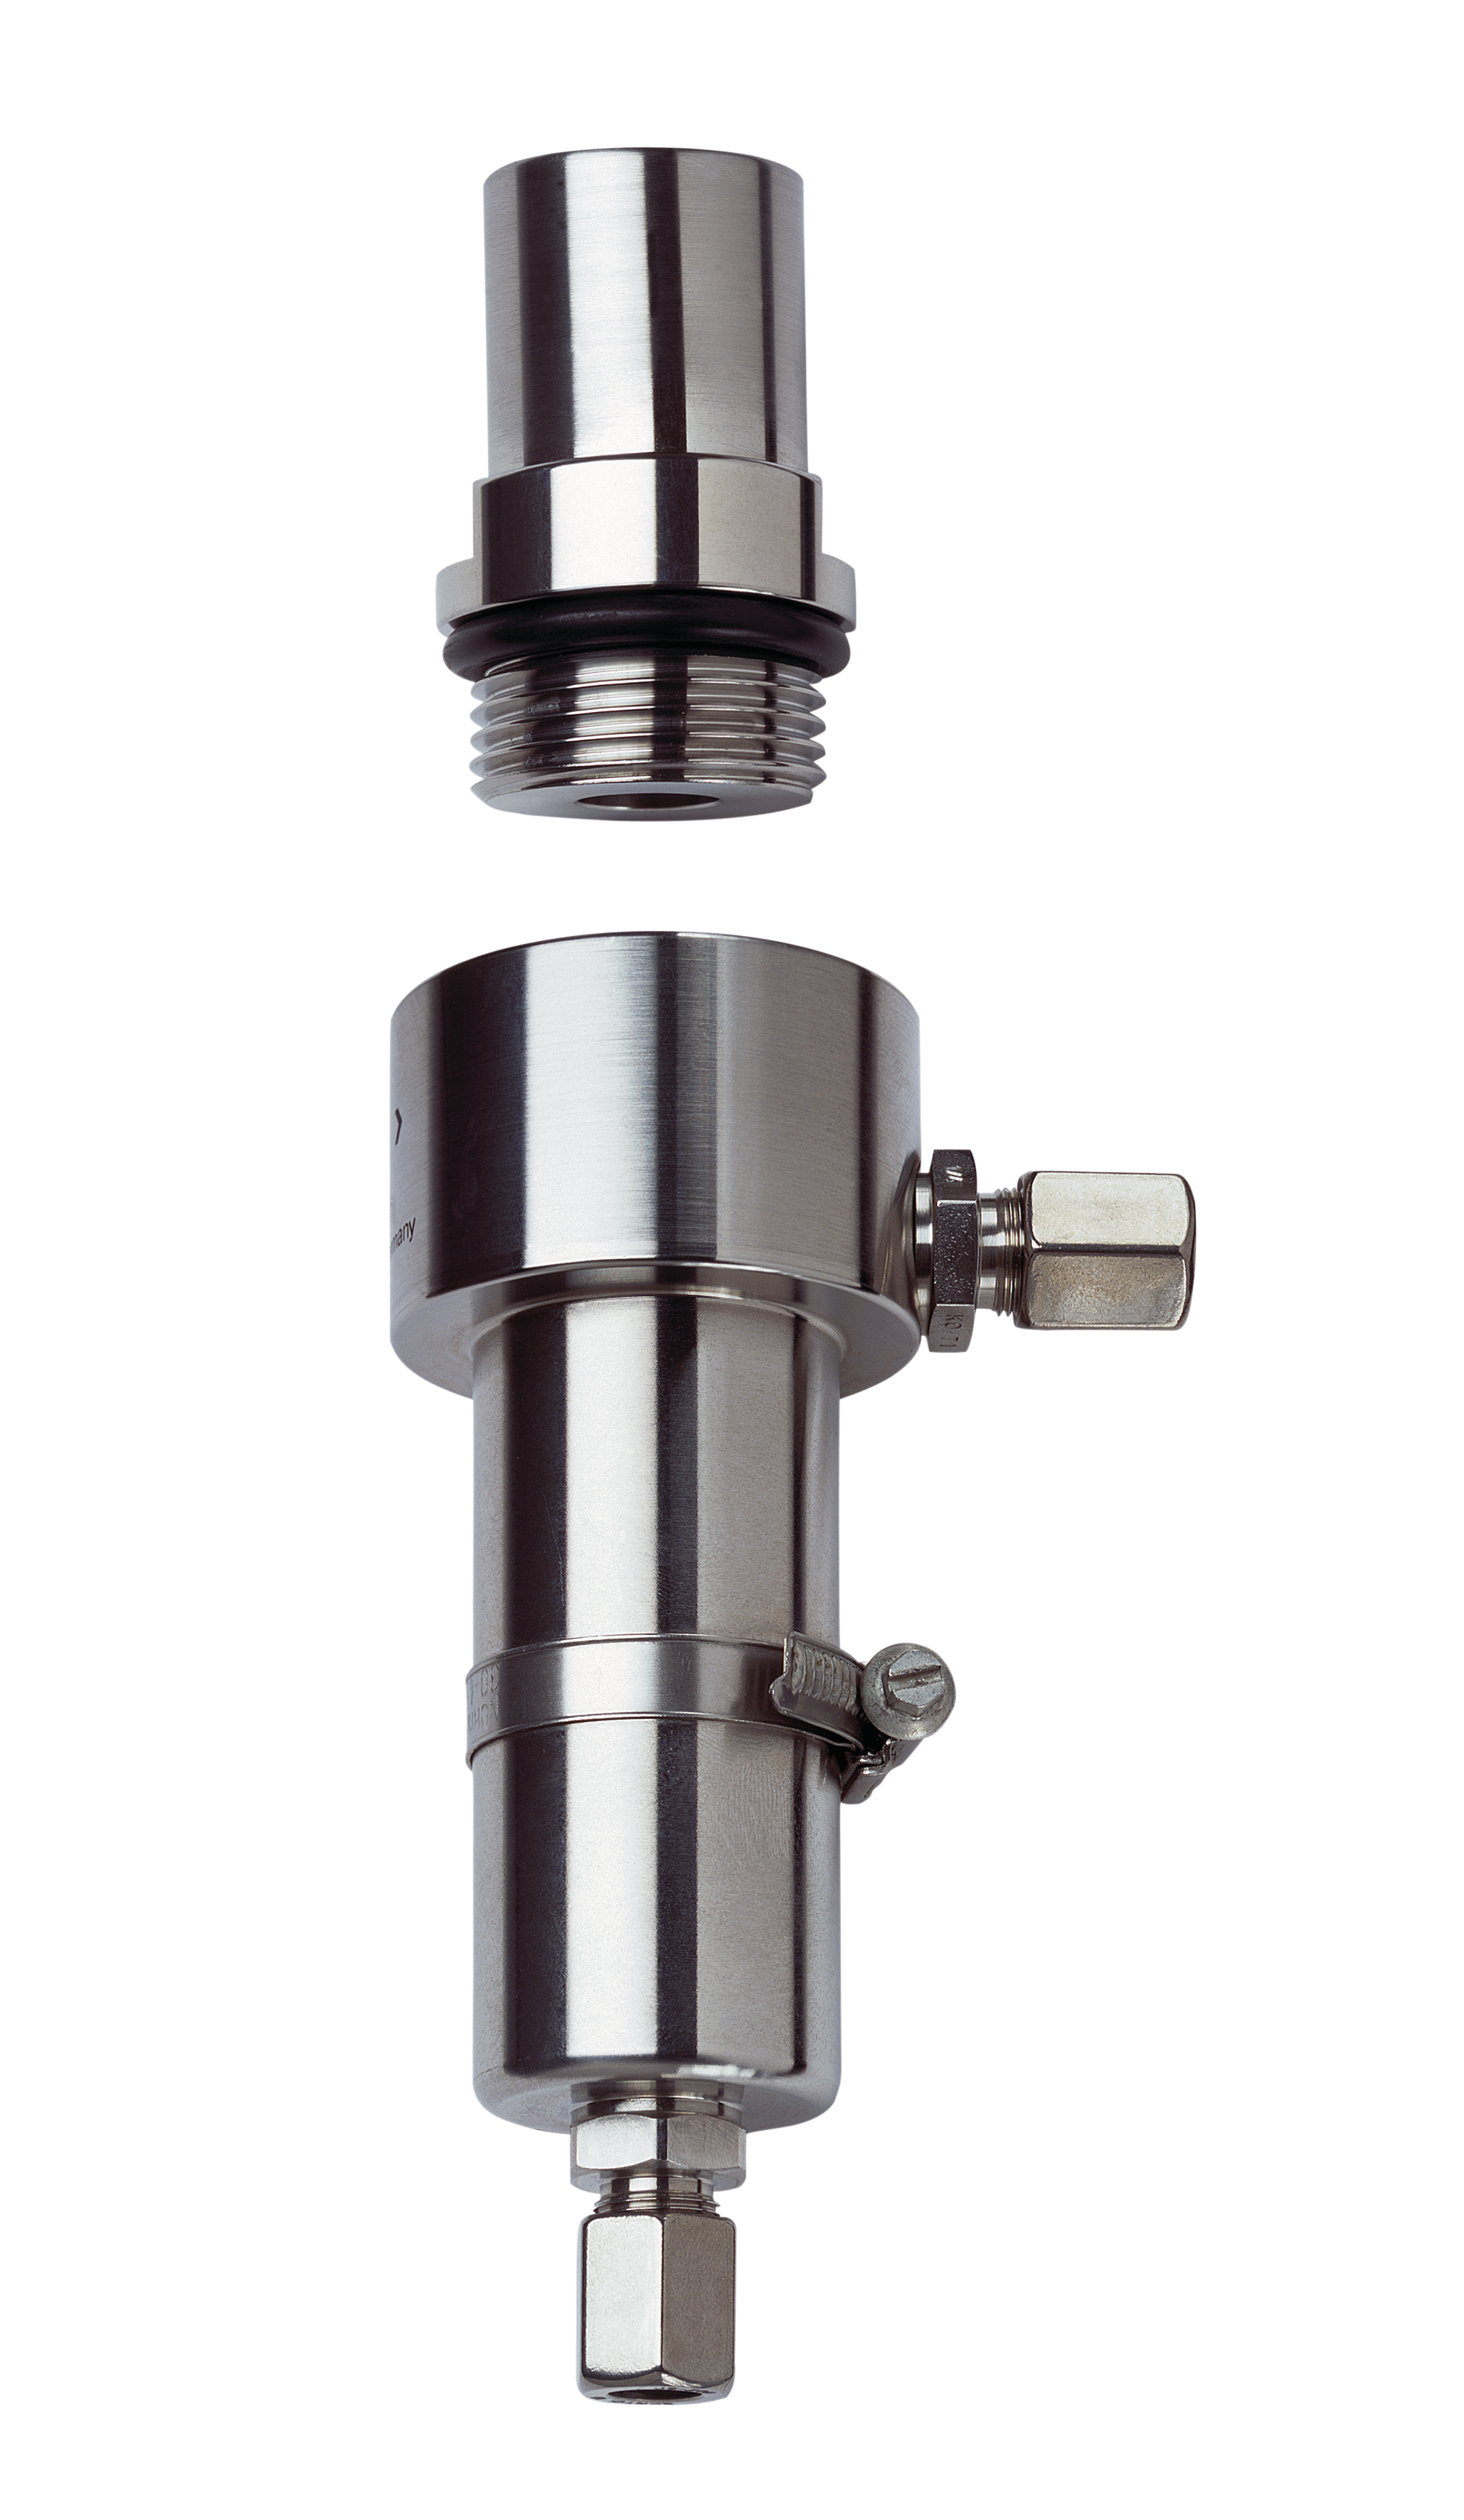 ARF200 Flow-Through Fitting | Stainless steel or Hastelloy C22 | One sensor | Process connection via cutting ring coupling